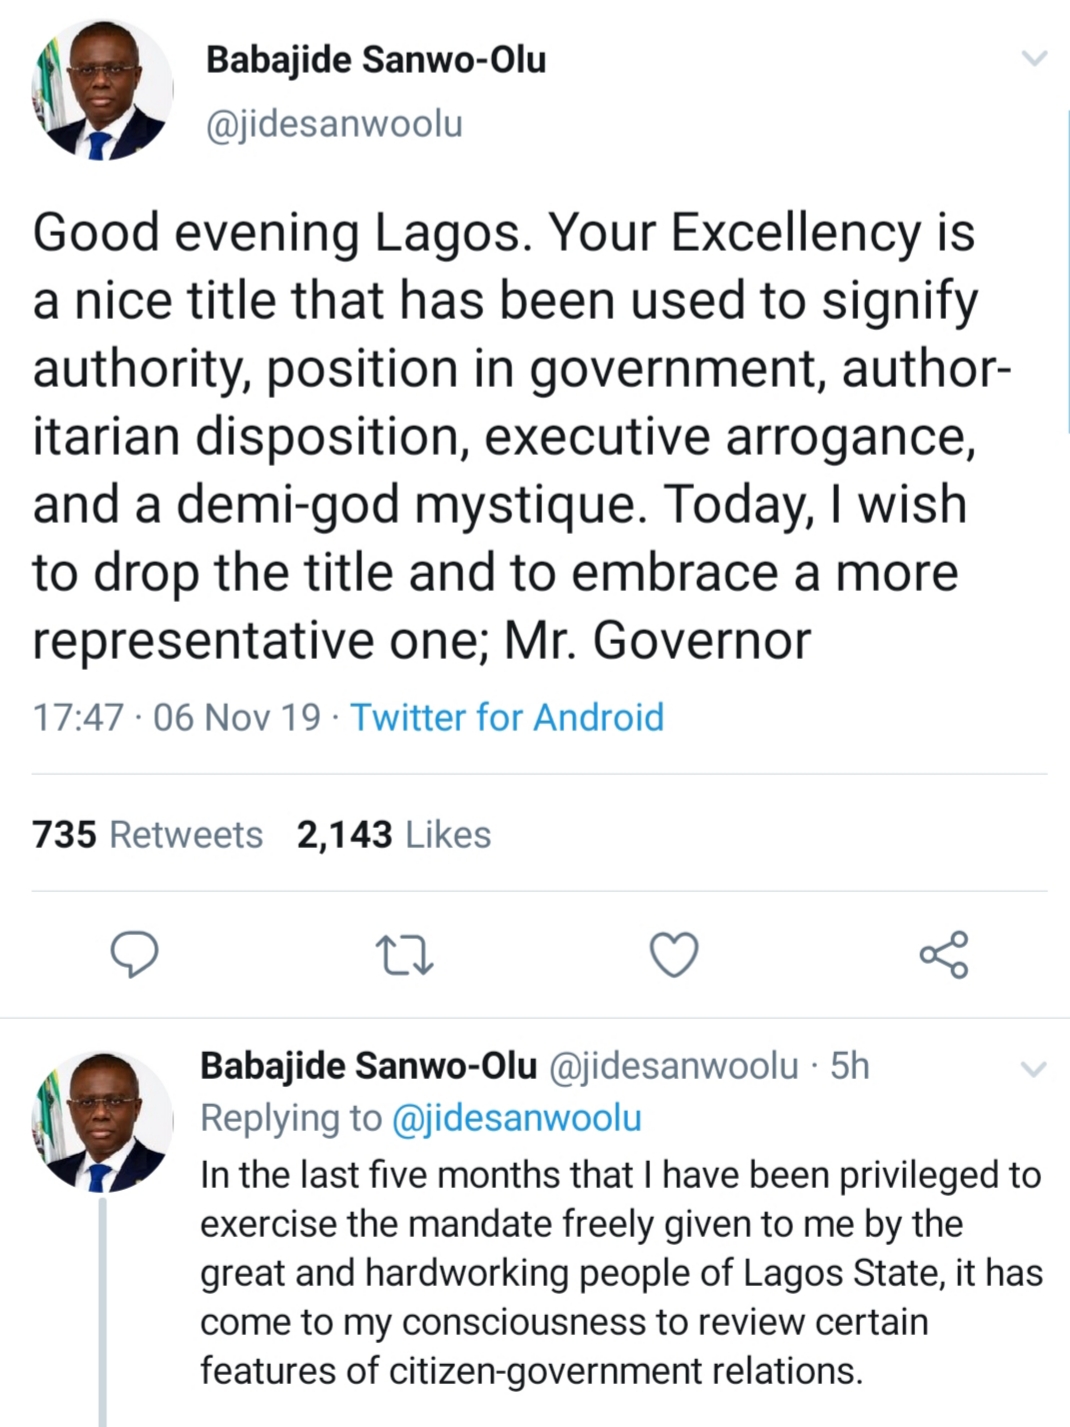 sanwo-olu-selects-new-title-mr.-governor-drops-your-excellency